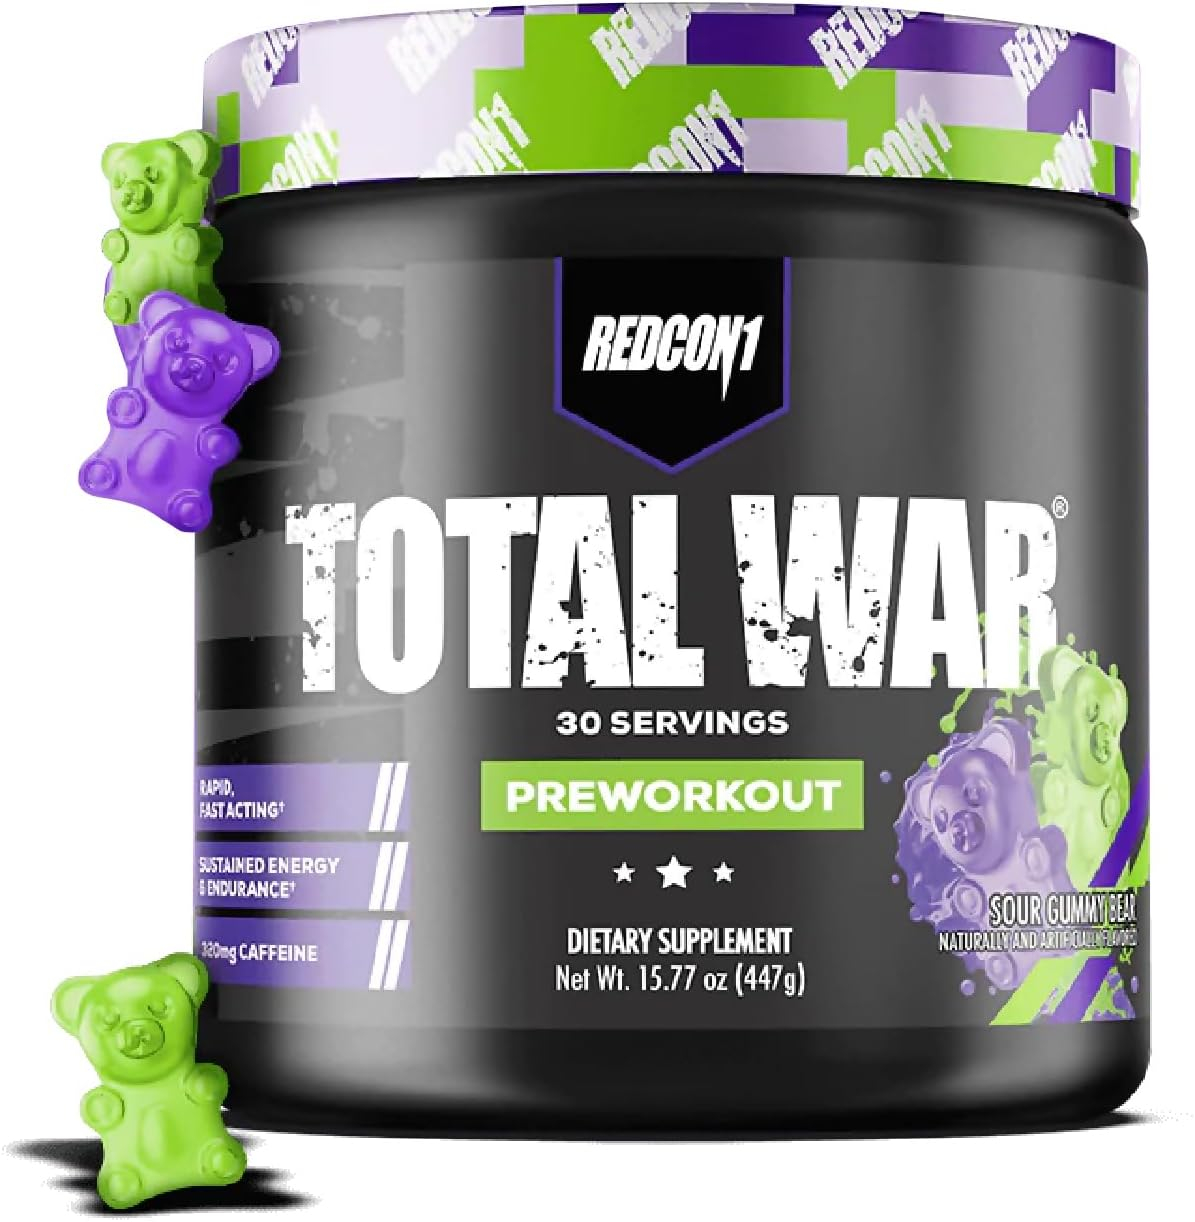 REDCON1 Total War Preworkout - Contains 320mg of Caffeine from Green Tea, Juniper  Beta Alanine - Pre Work Out with Amino Acids to Increase Pump, Energy + Endurance (Sour Gummy Bear, 30 Servings)